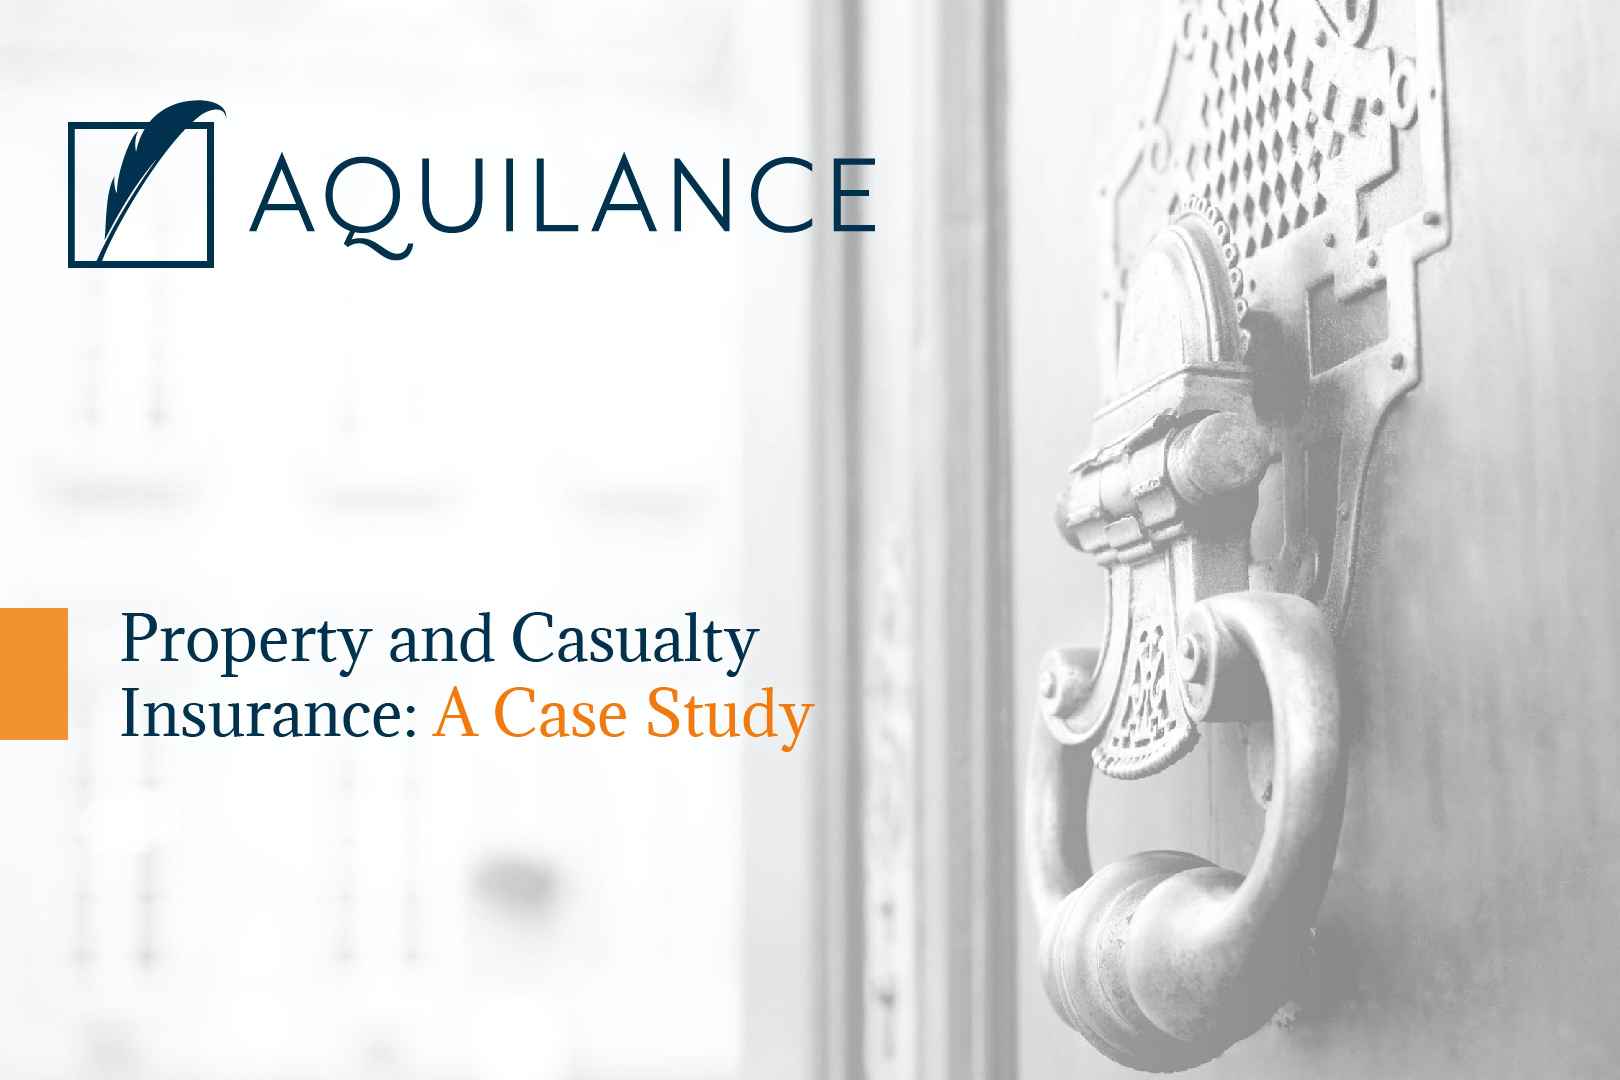 Property and Casualty Insurance: A Case Study